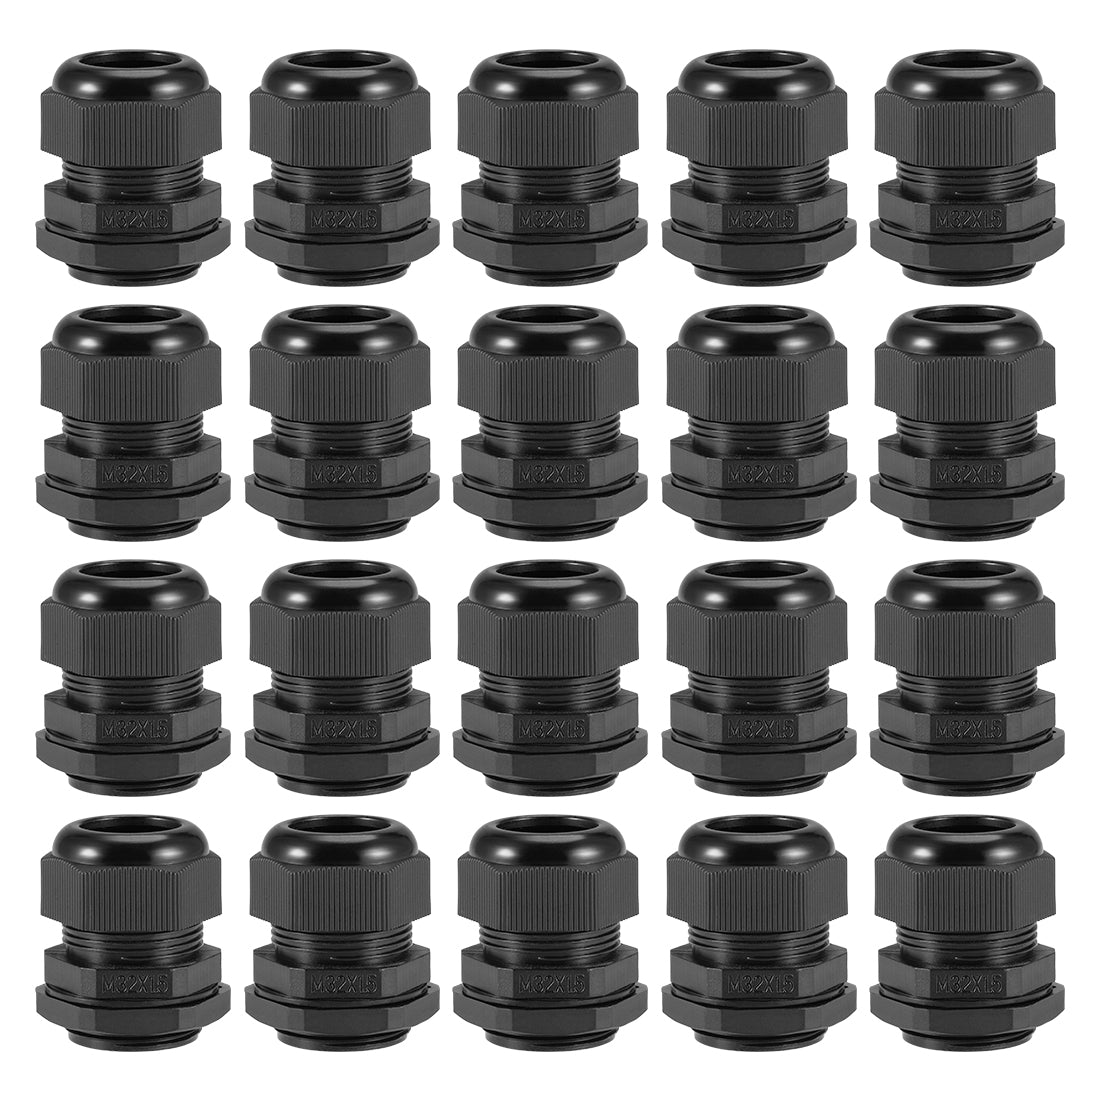 uxcell Uxcell M32x1.5 Cable Gland 16mm-21mm Wire Hole Waterproof Nylon Joint Adjustable Locknut with Washer Black 20pcs